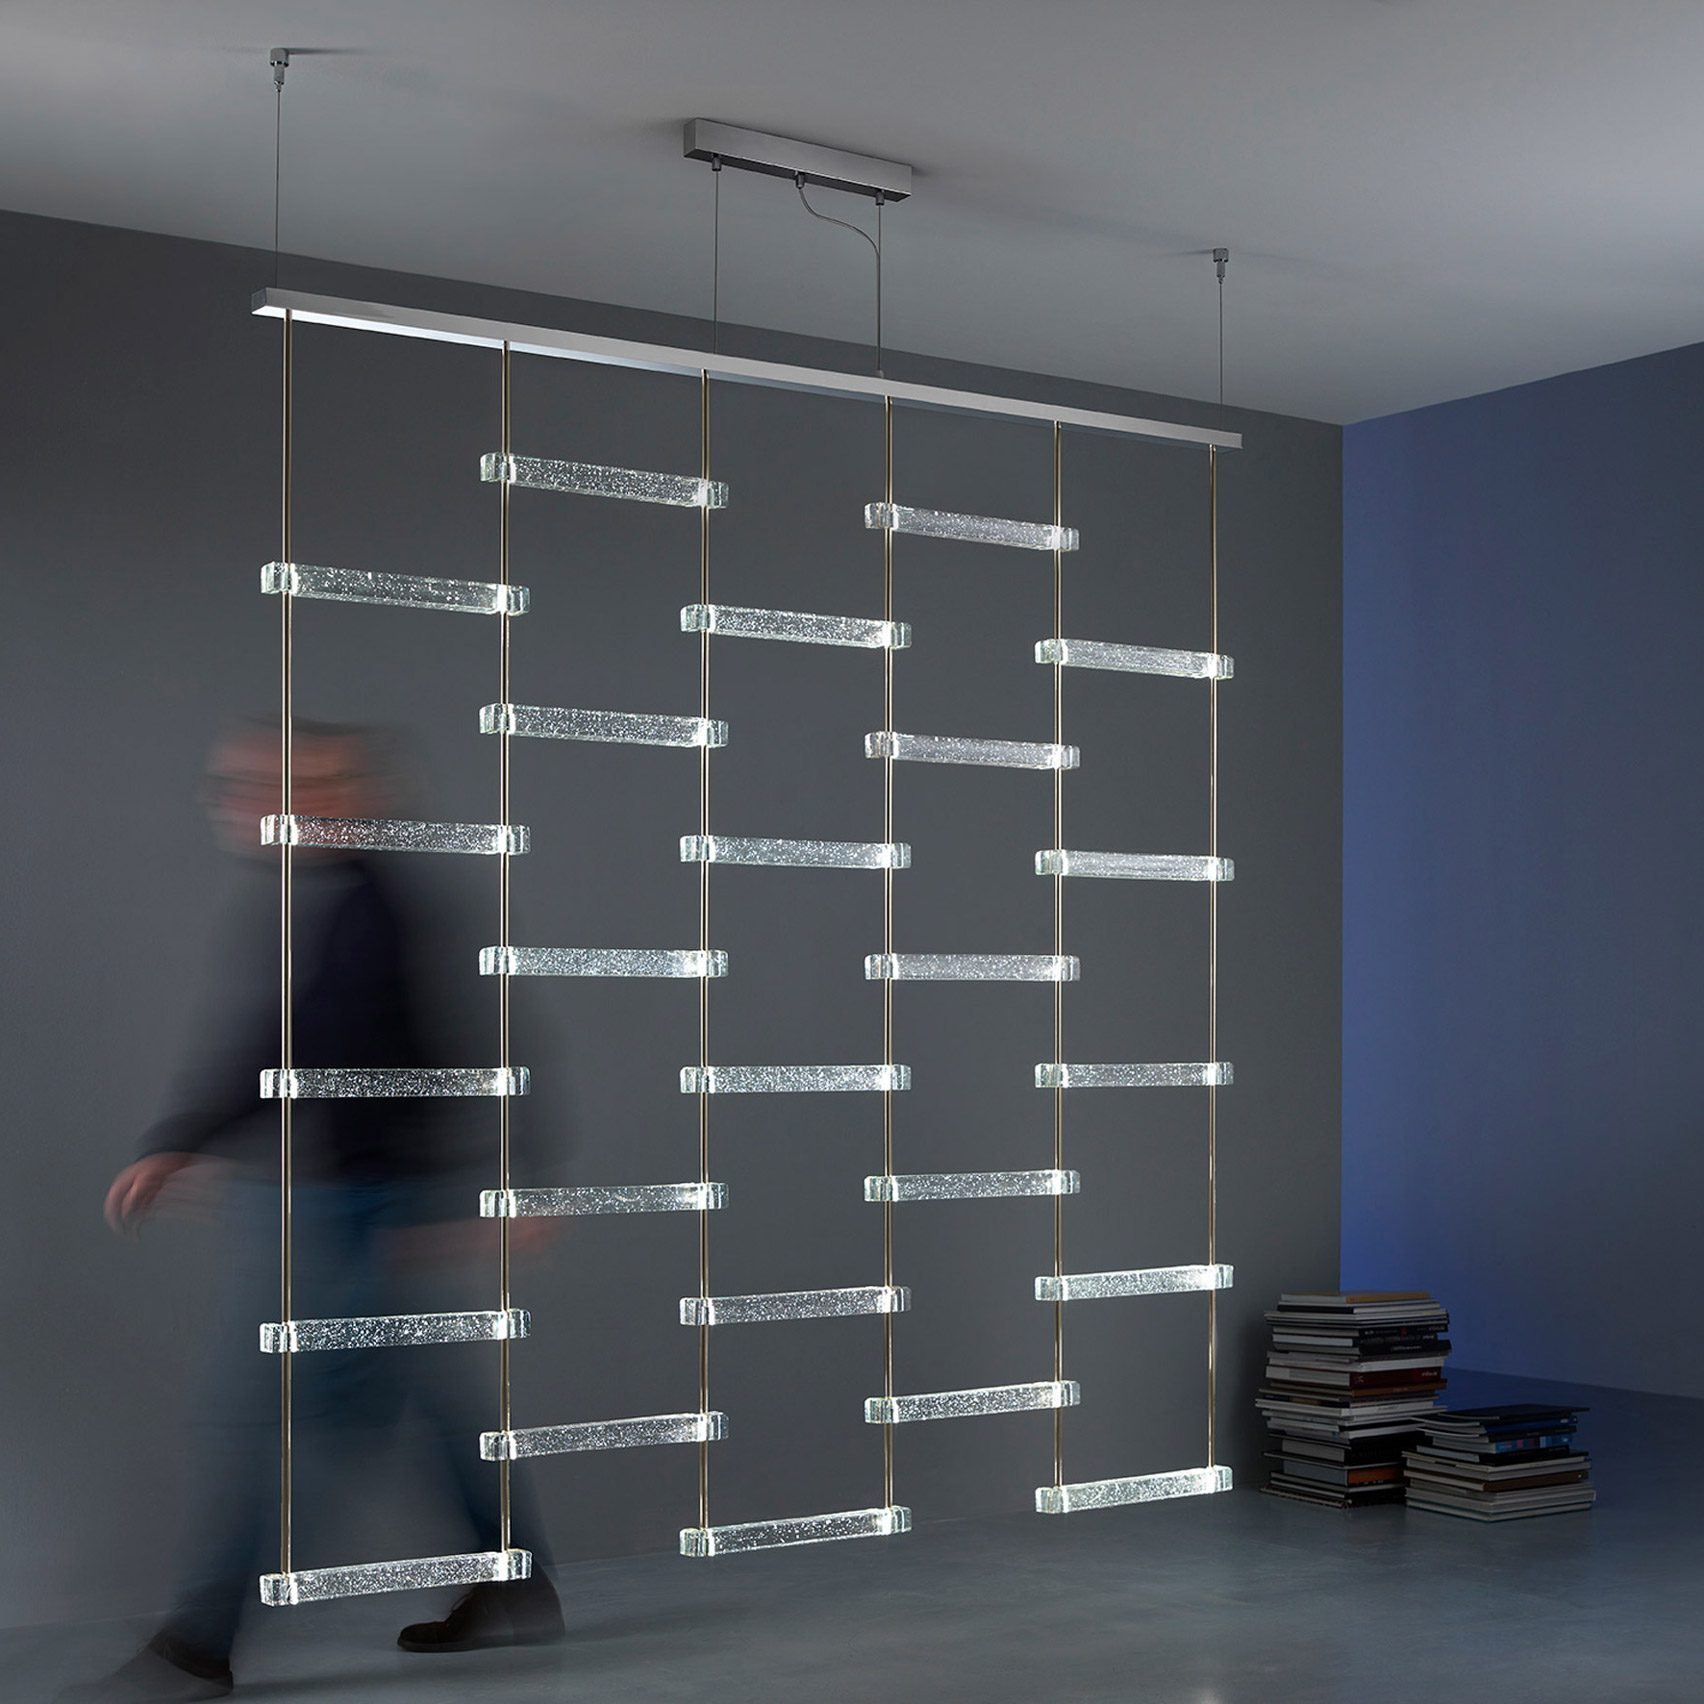 Suspended Piola lighting by Italamp